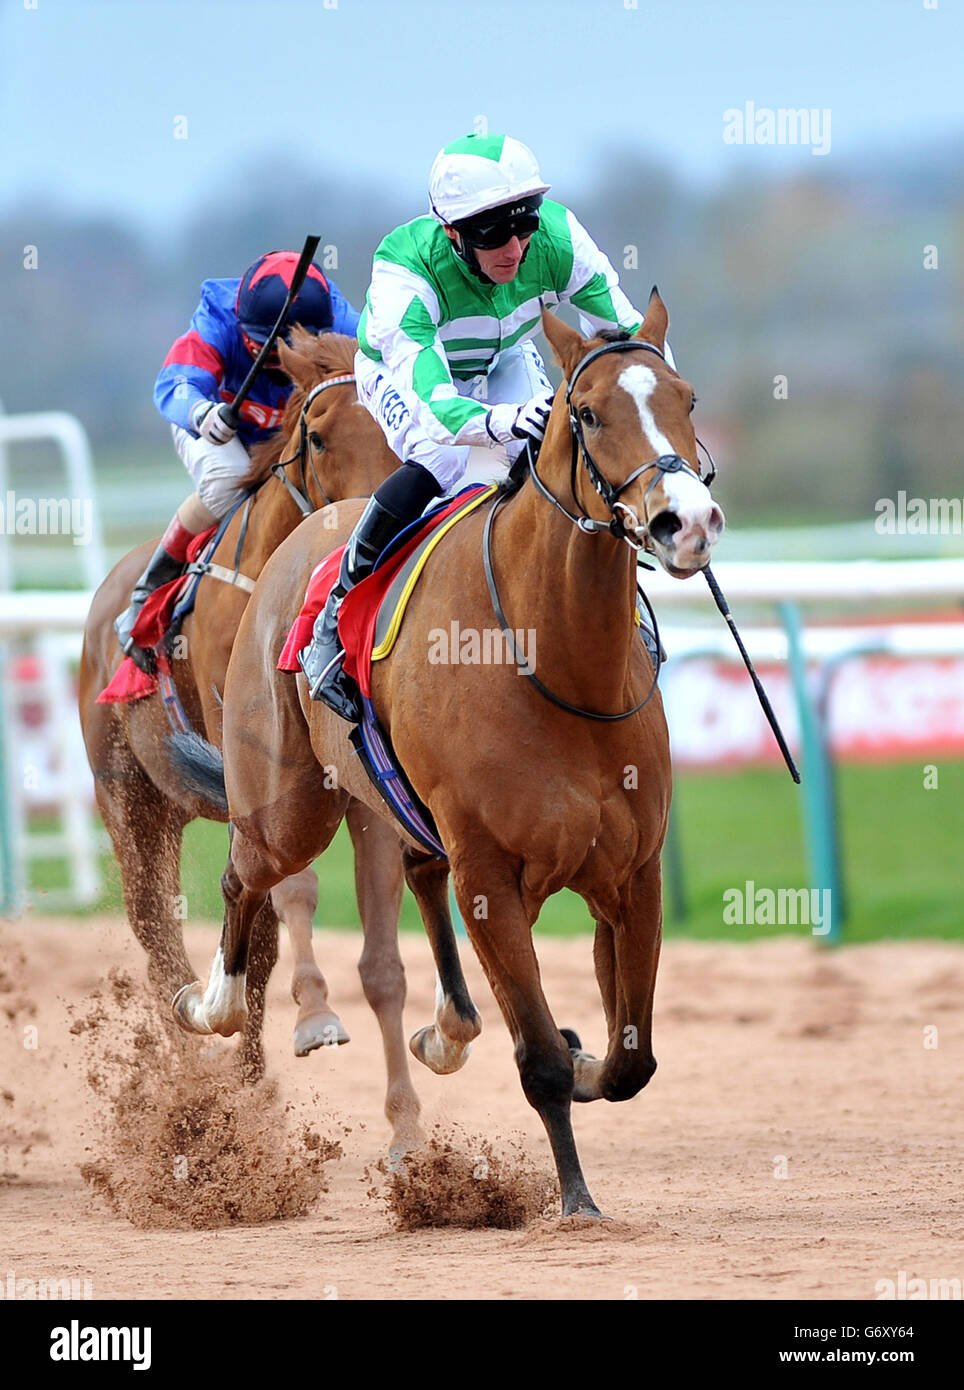 Horse Racing - Southwell Racecourse. Frontier Fighter ridden by Daniel Tudhope (right) wins The Ladbrokes Handicap Stakes at Southwell Racecourse. Stock Photo